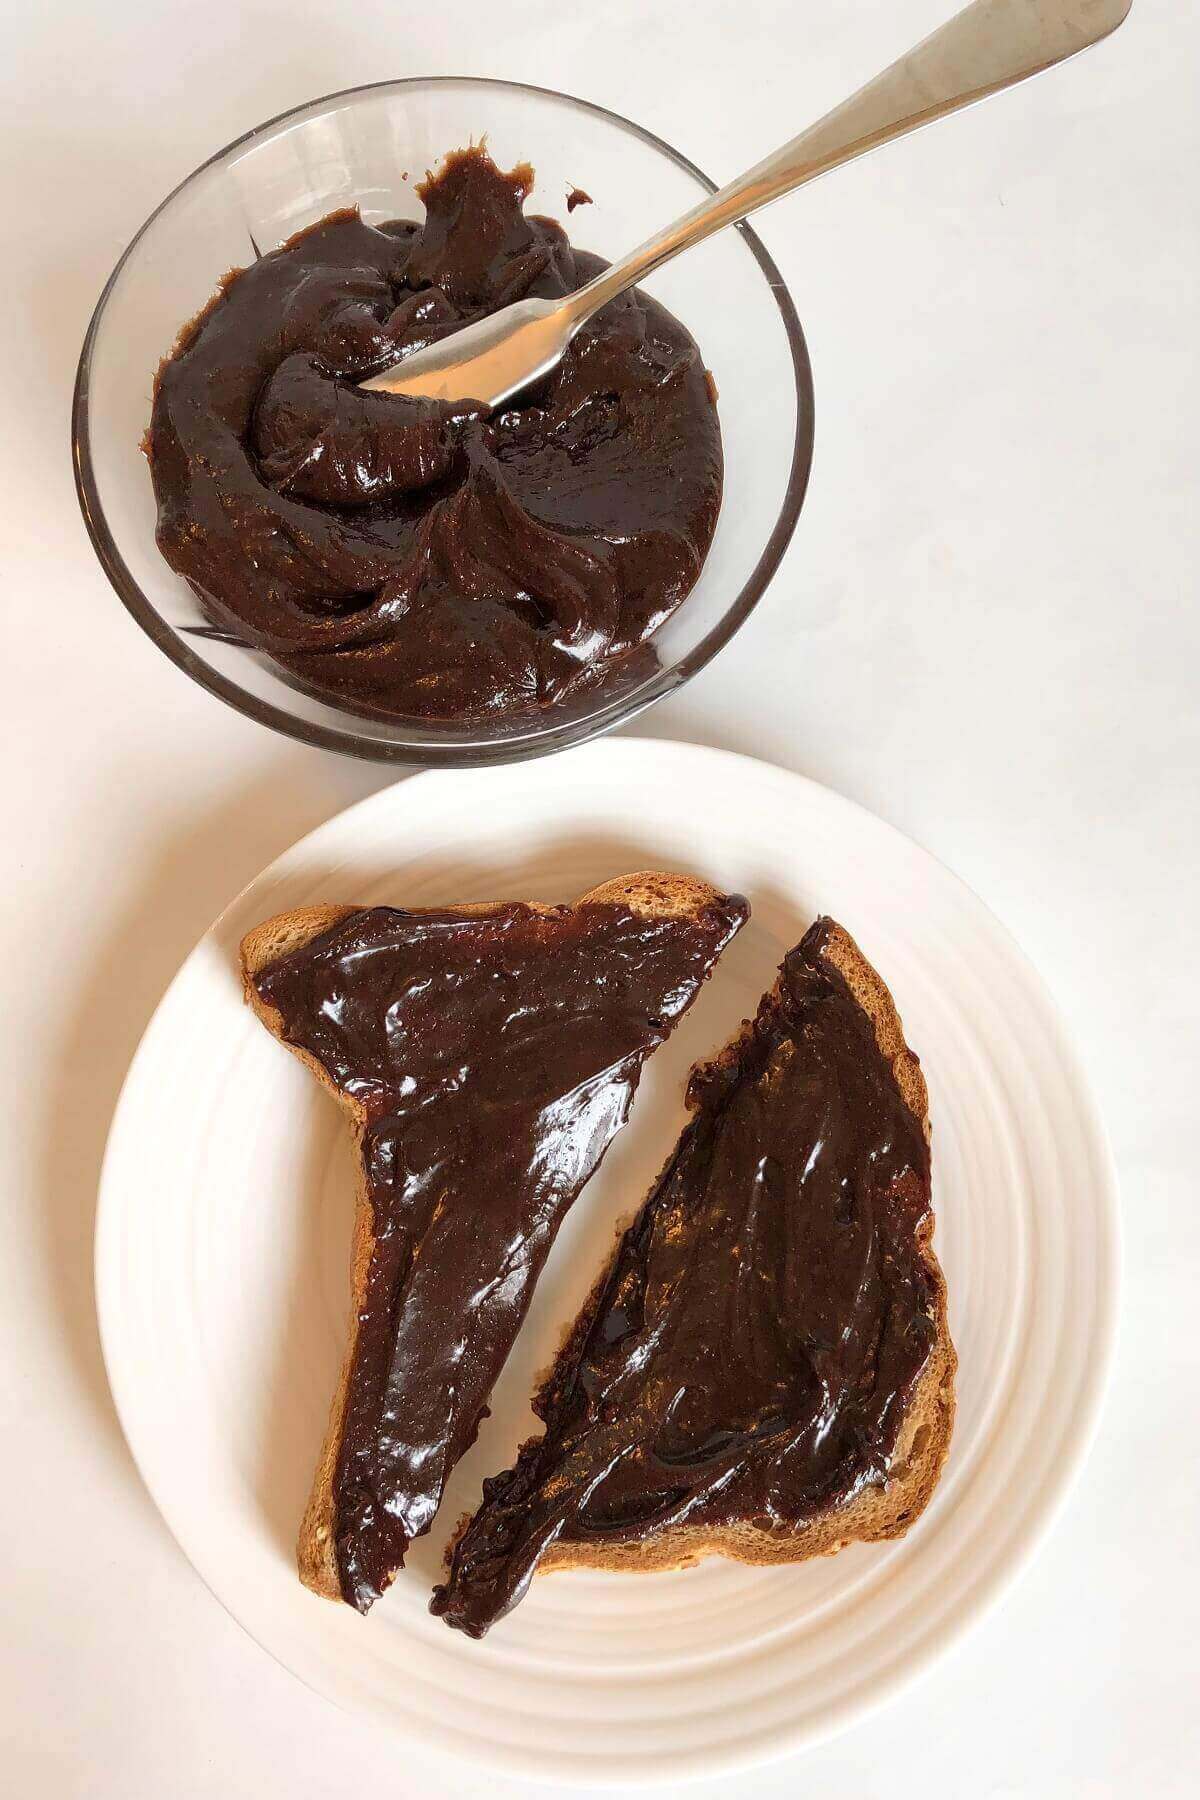 Toast with chocolate spread next to a glass bowl.